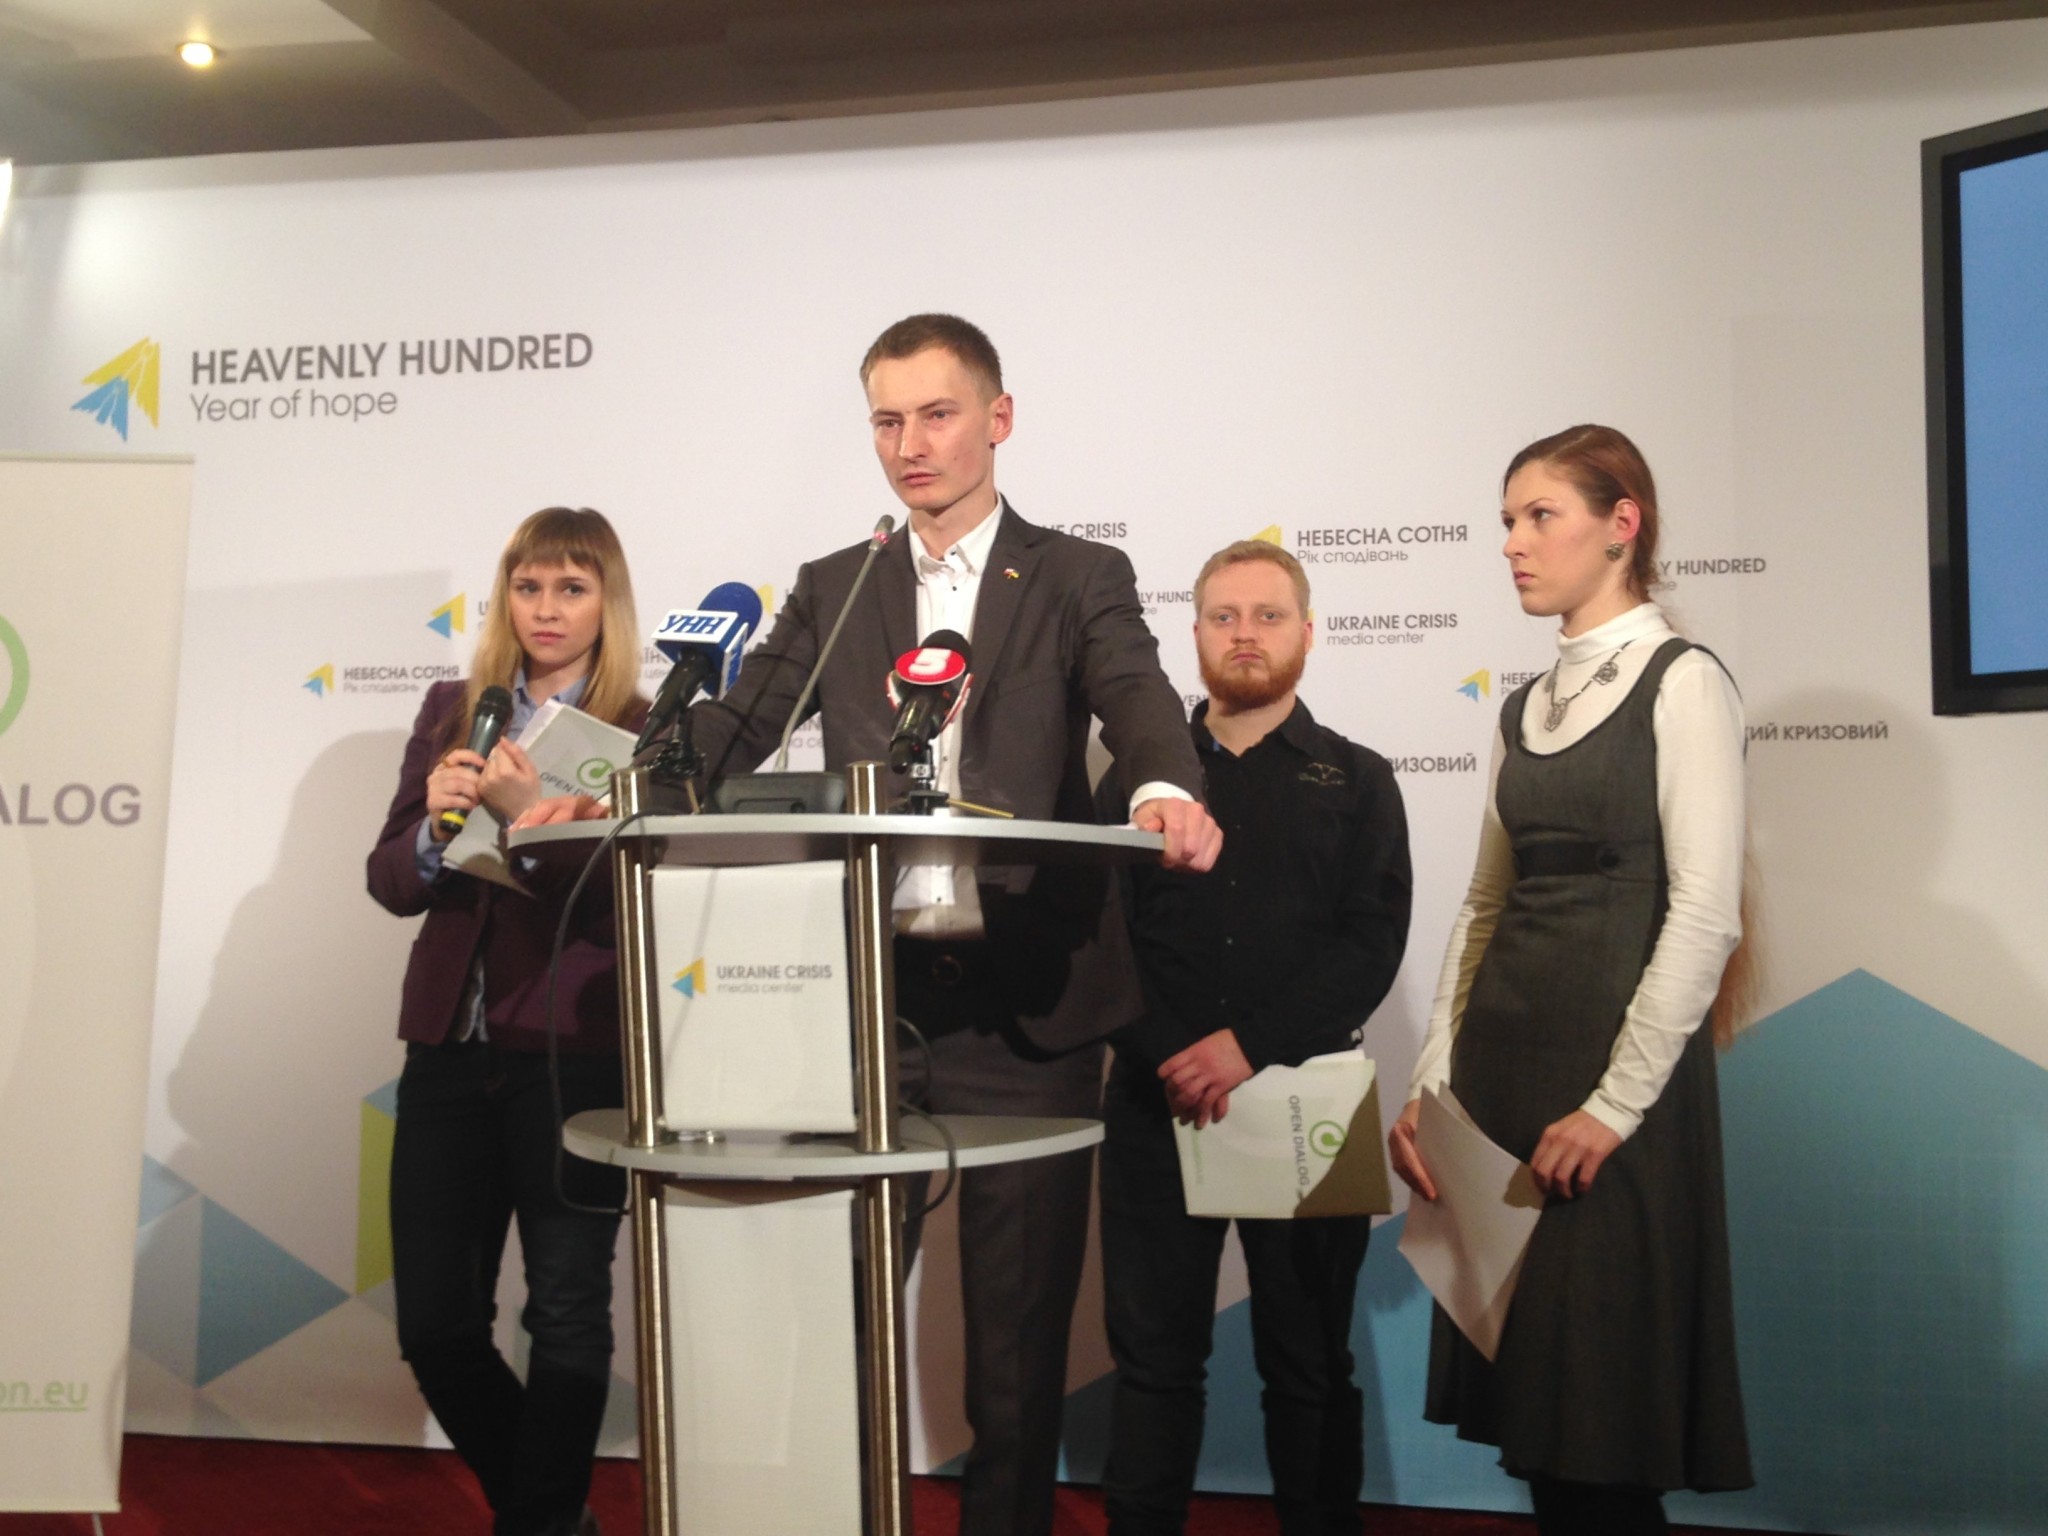 The Savchenko List announcement by the Open Dialog Foundation in Kyiv